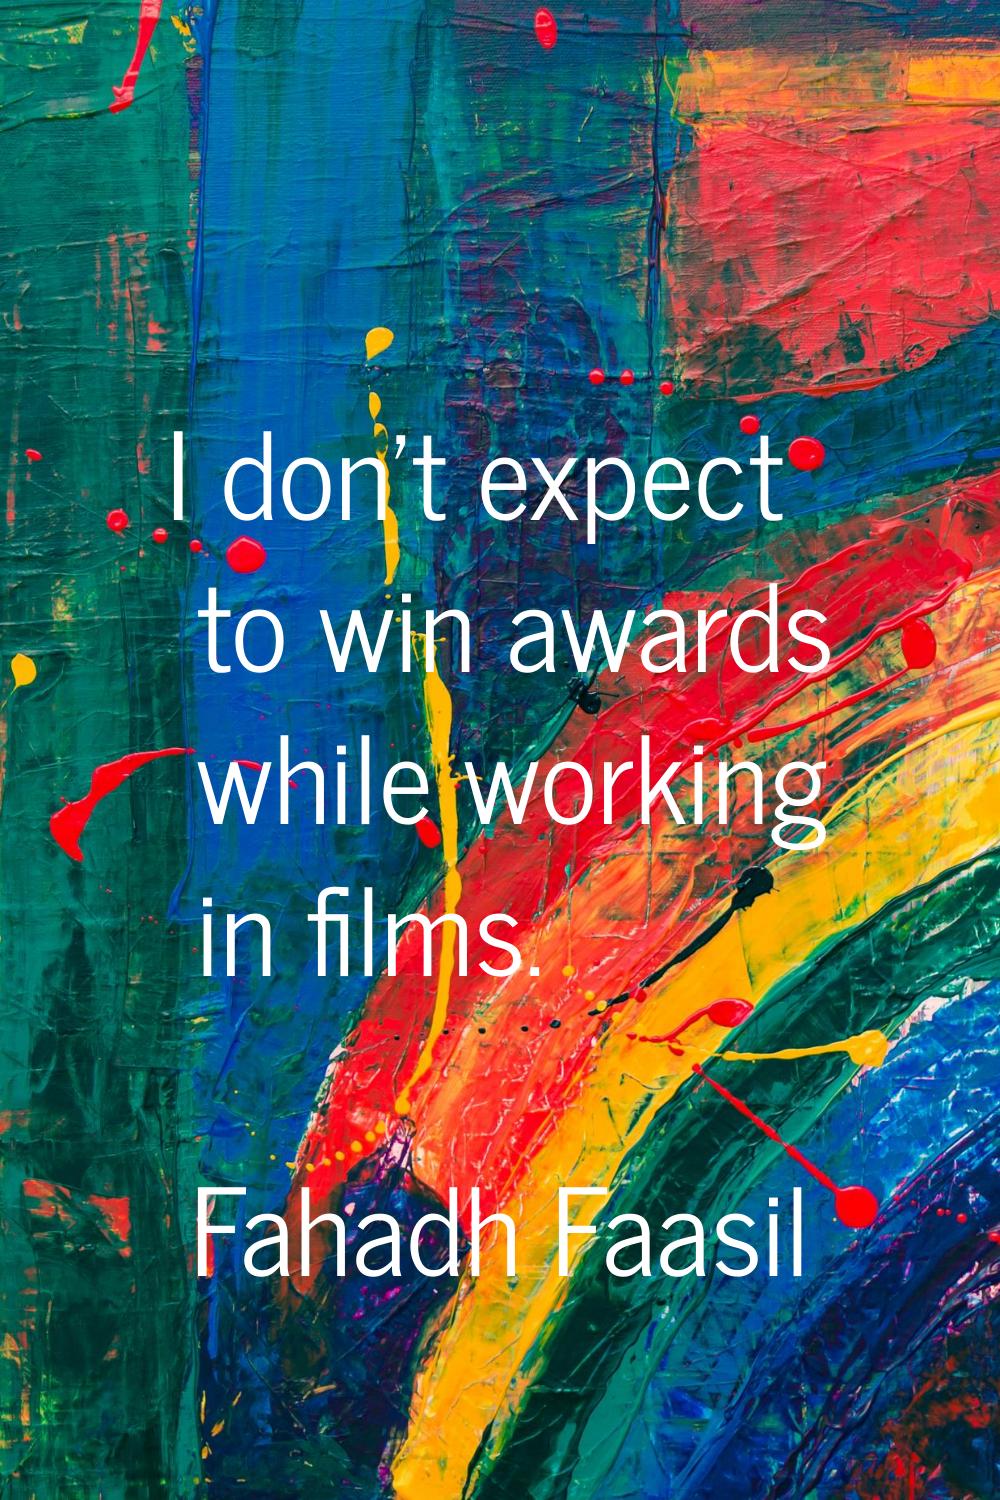 I don't expect to win awards while working in films.